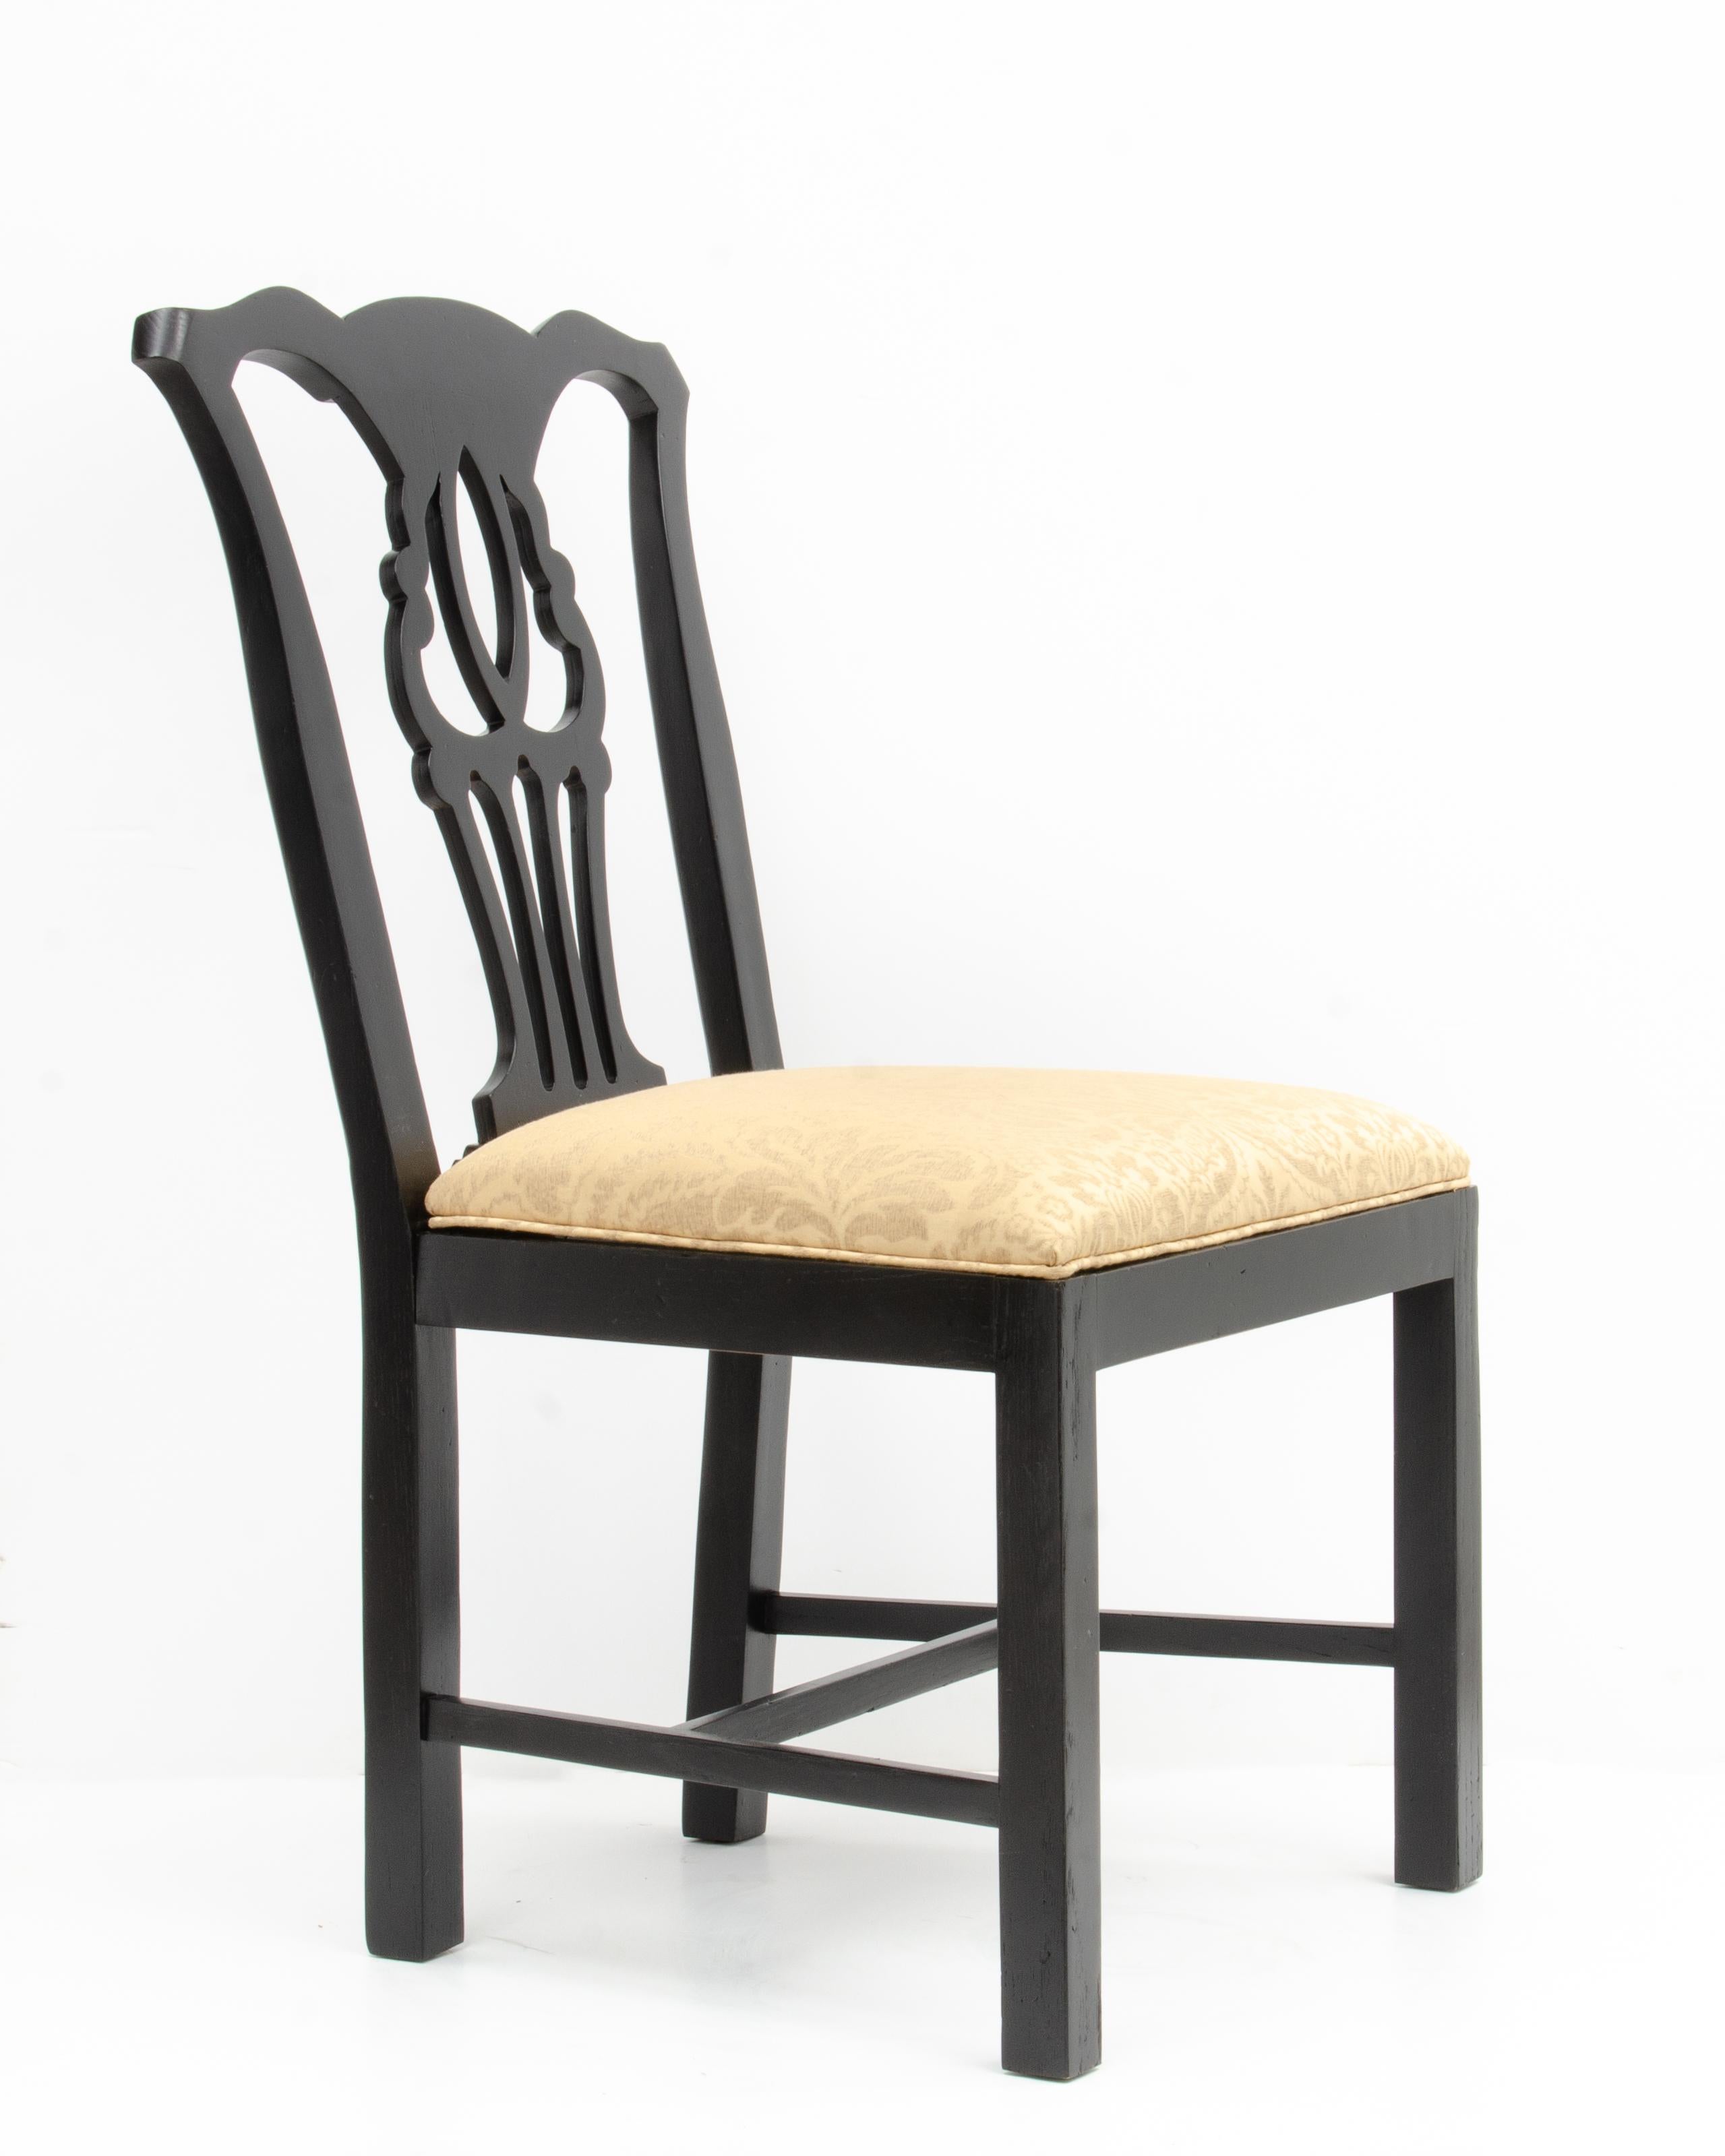 Black Lacquer John Stuart Chippendale Dining Chairs Mid Century - a Set of 6 For Sale 2